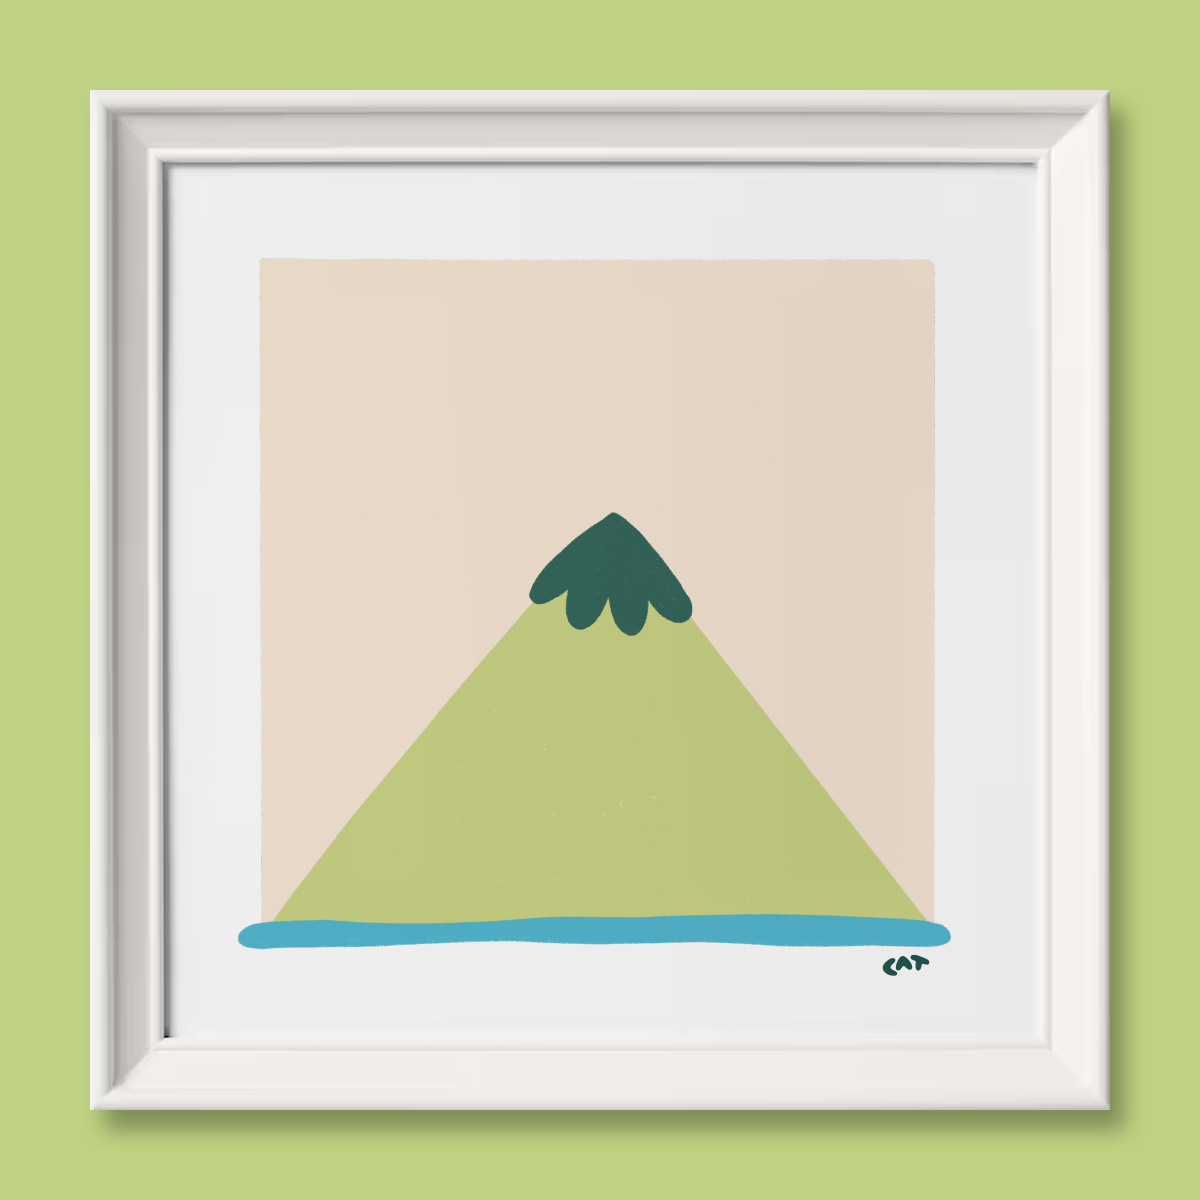 White unframed print of a beige square with a green triangle that looks like a mountain, sitting on top of a blue line.